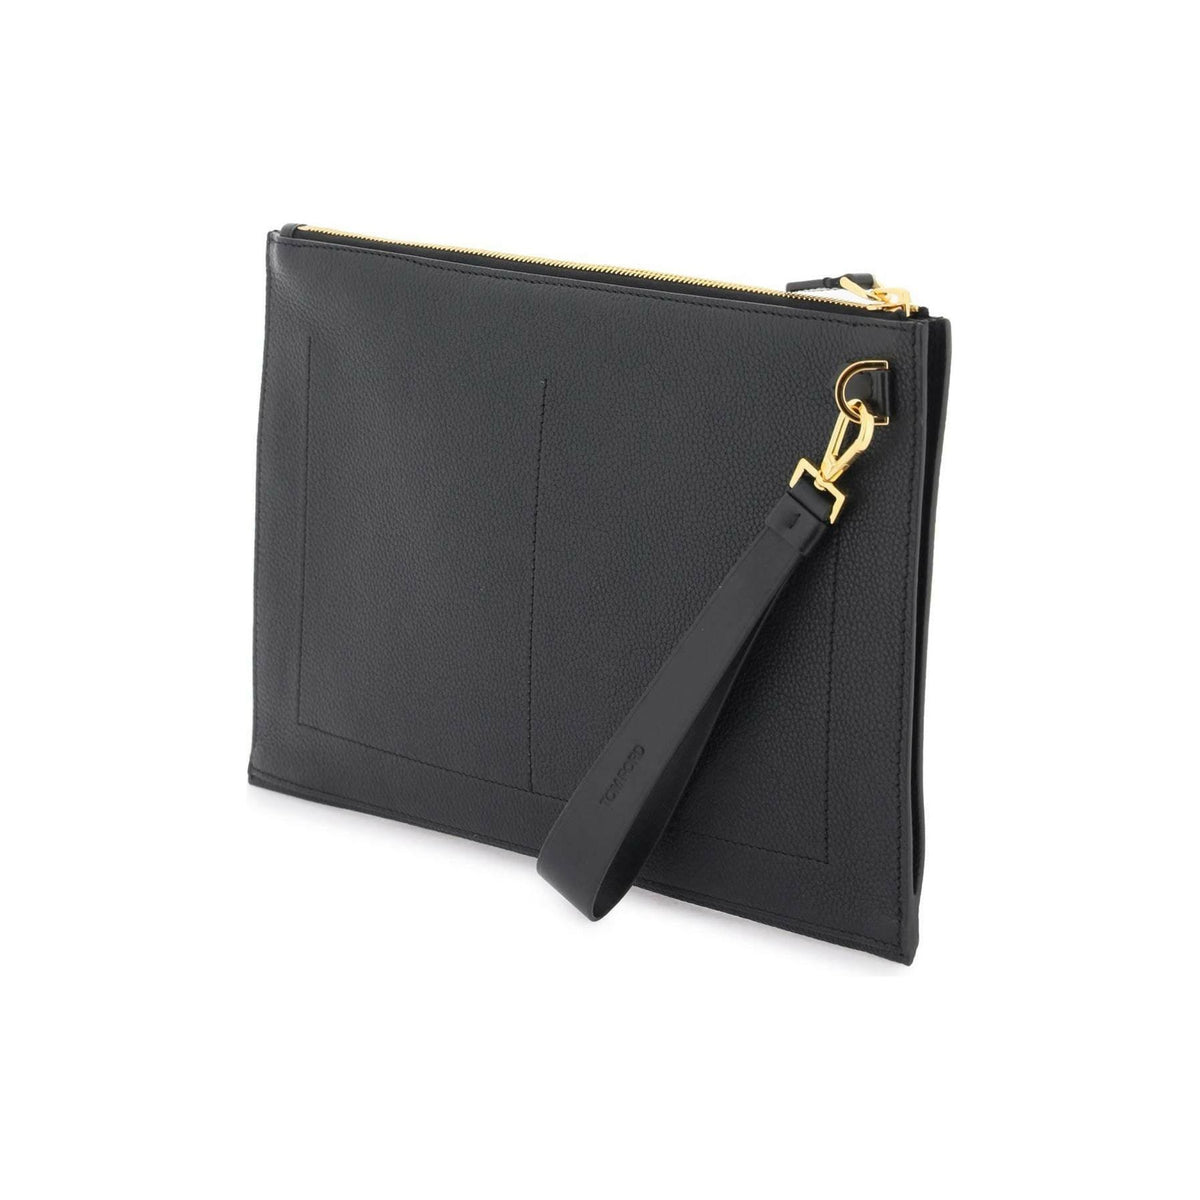 TOM FORD - Grained Leather Pouch - JOHN JULIA